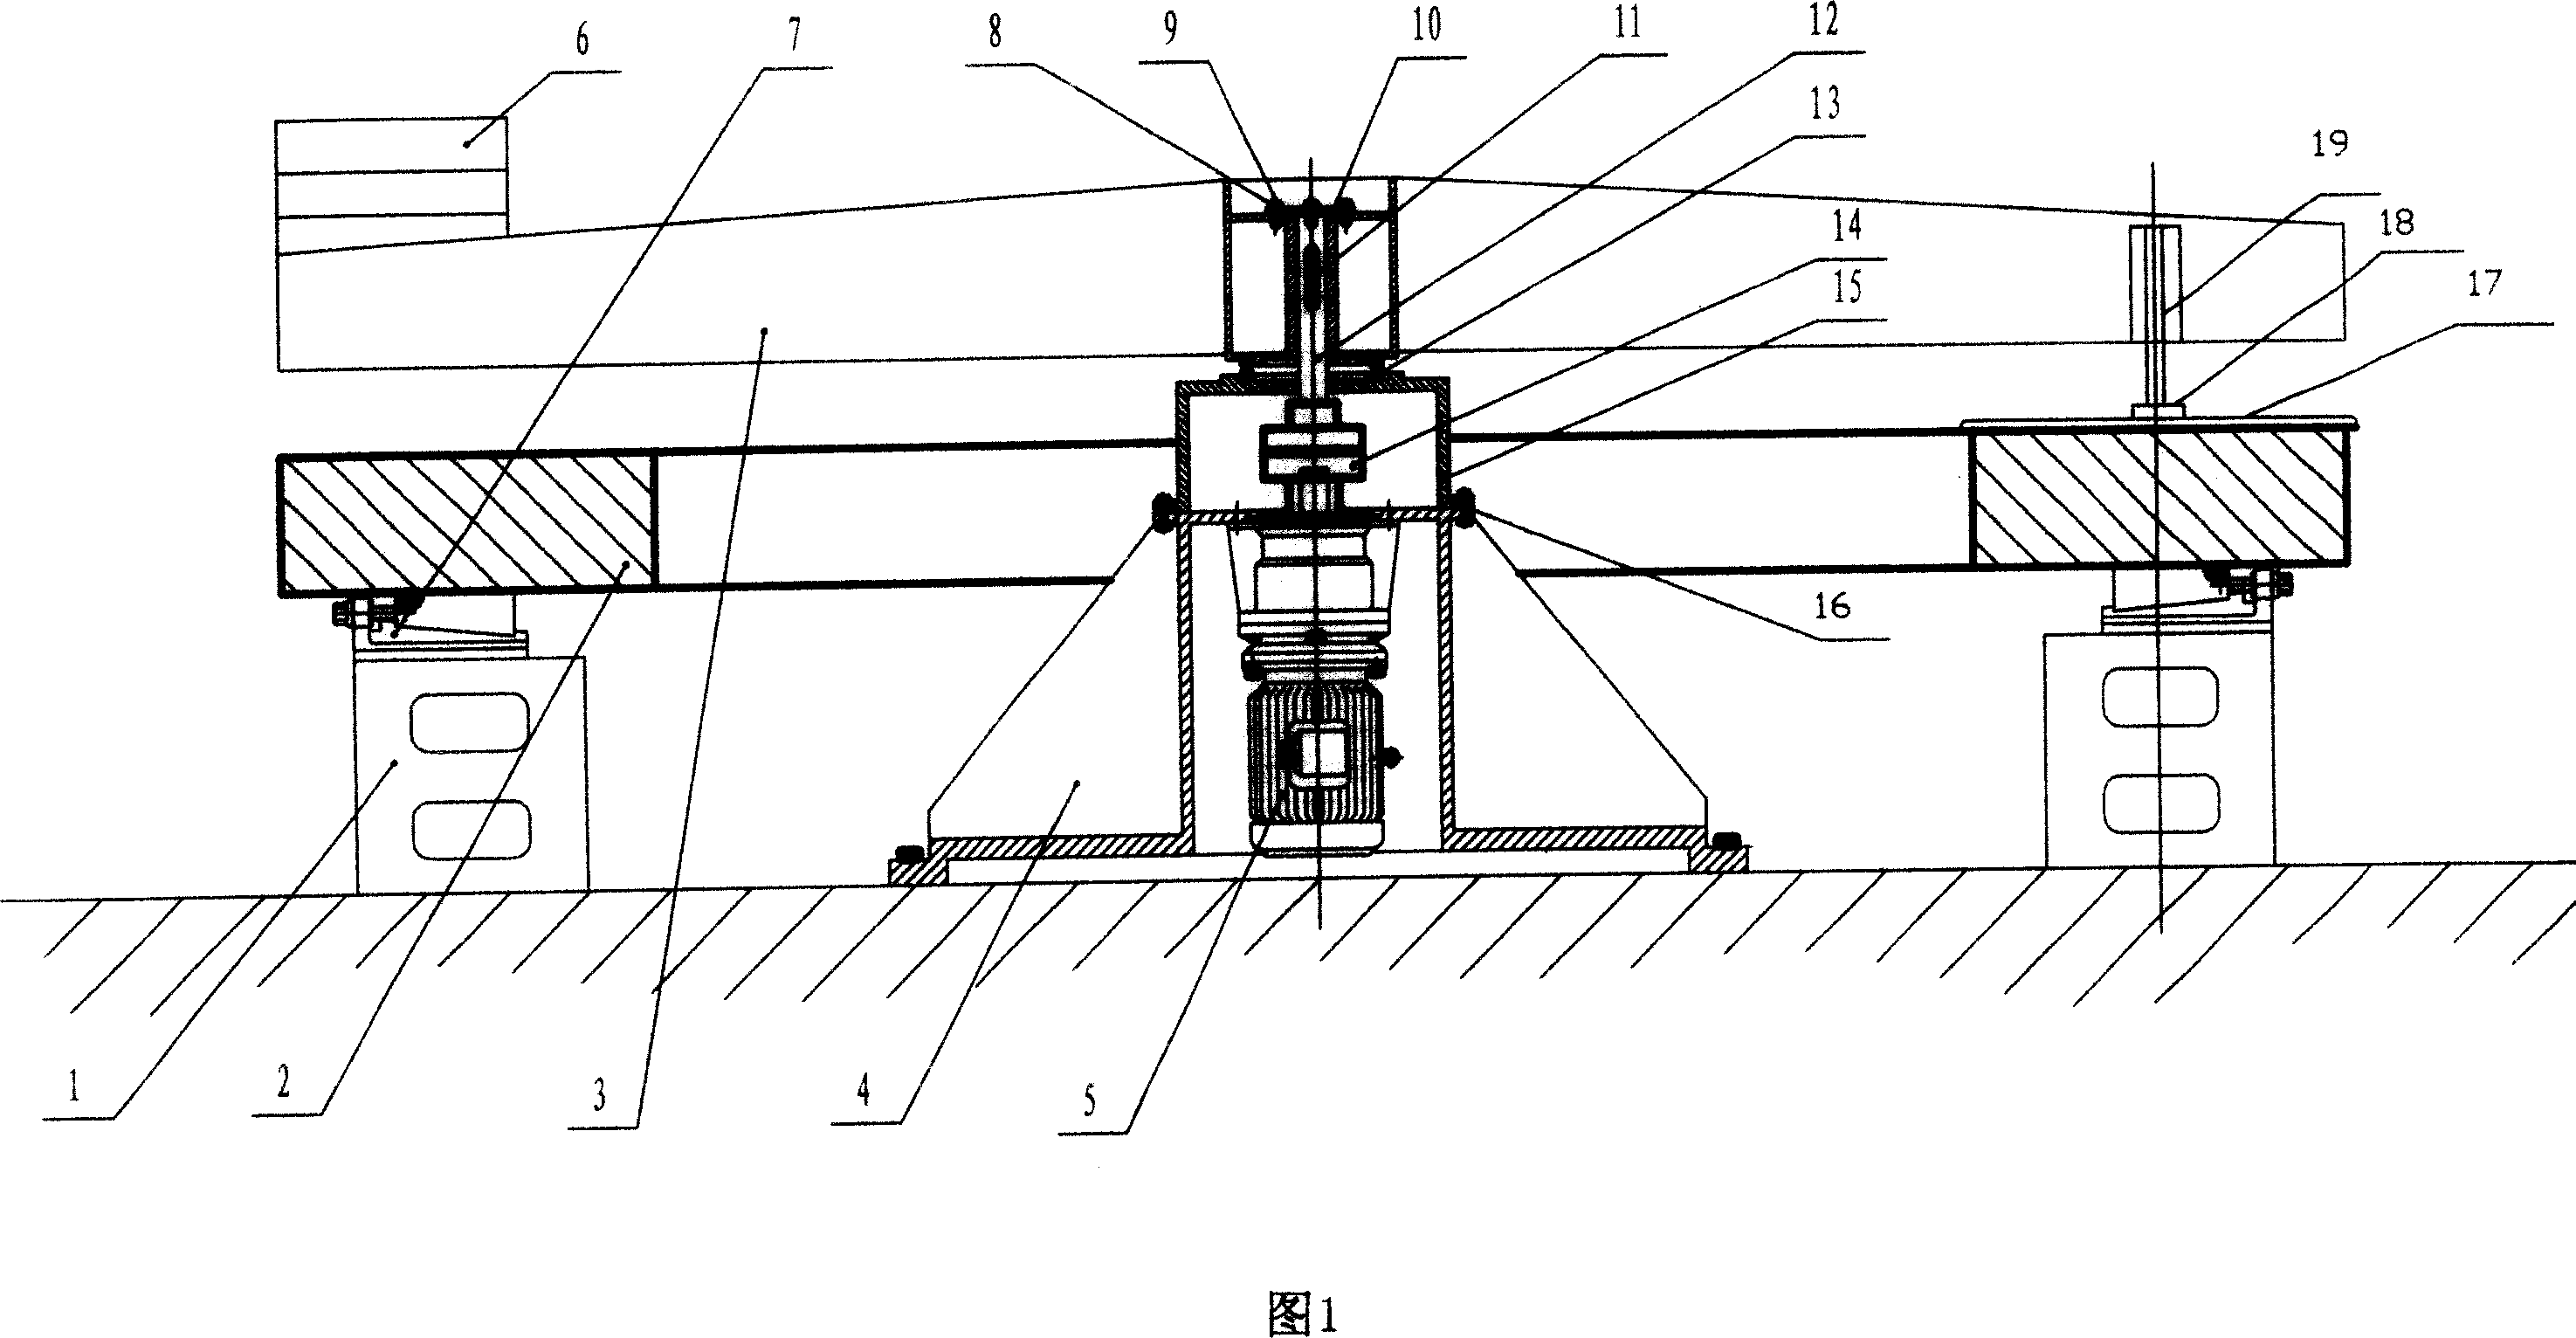 Hydraulic generator mirror plate grinding apparatus and process